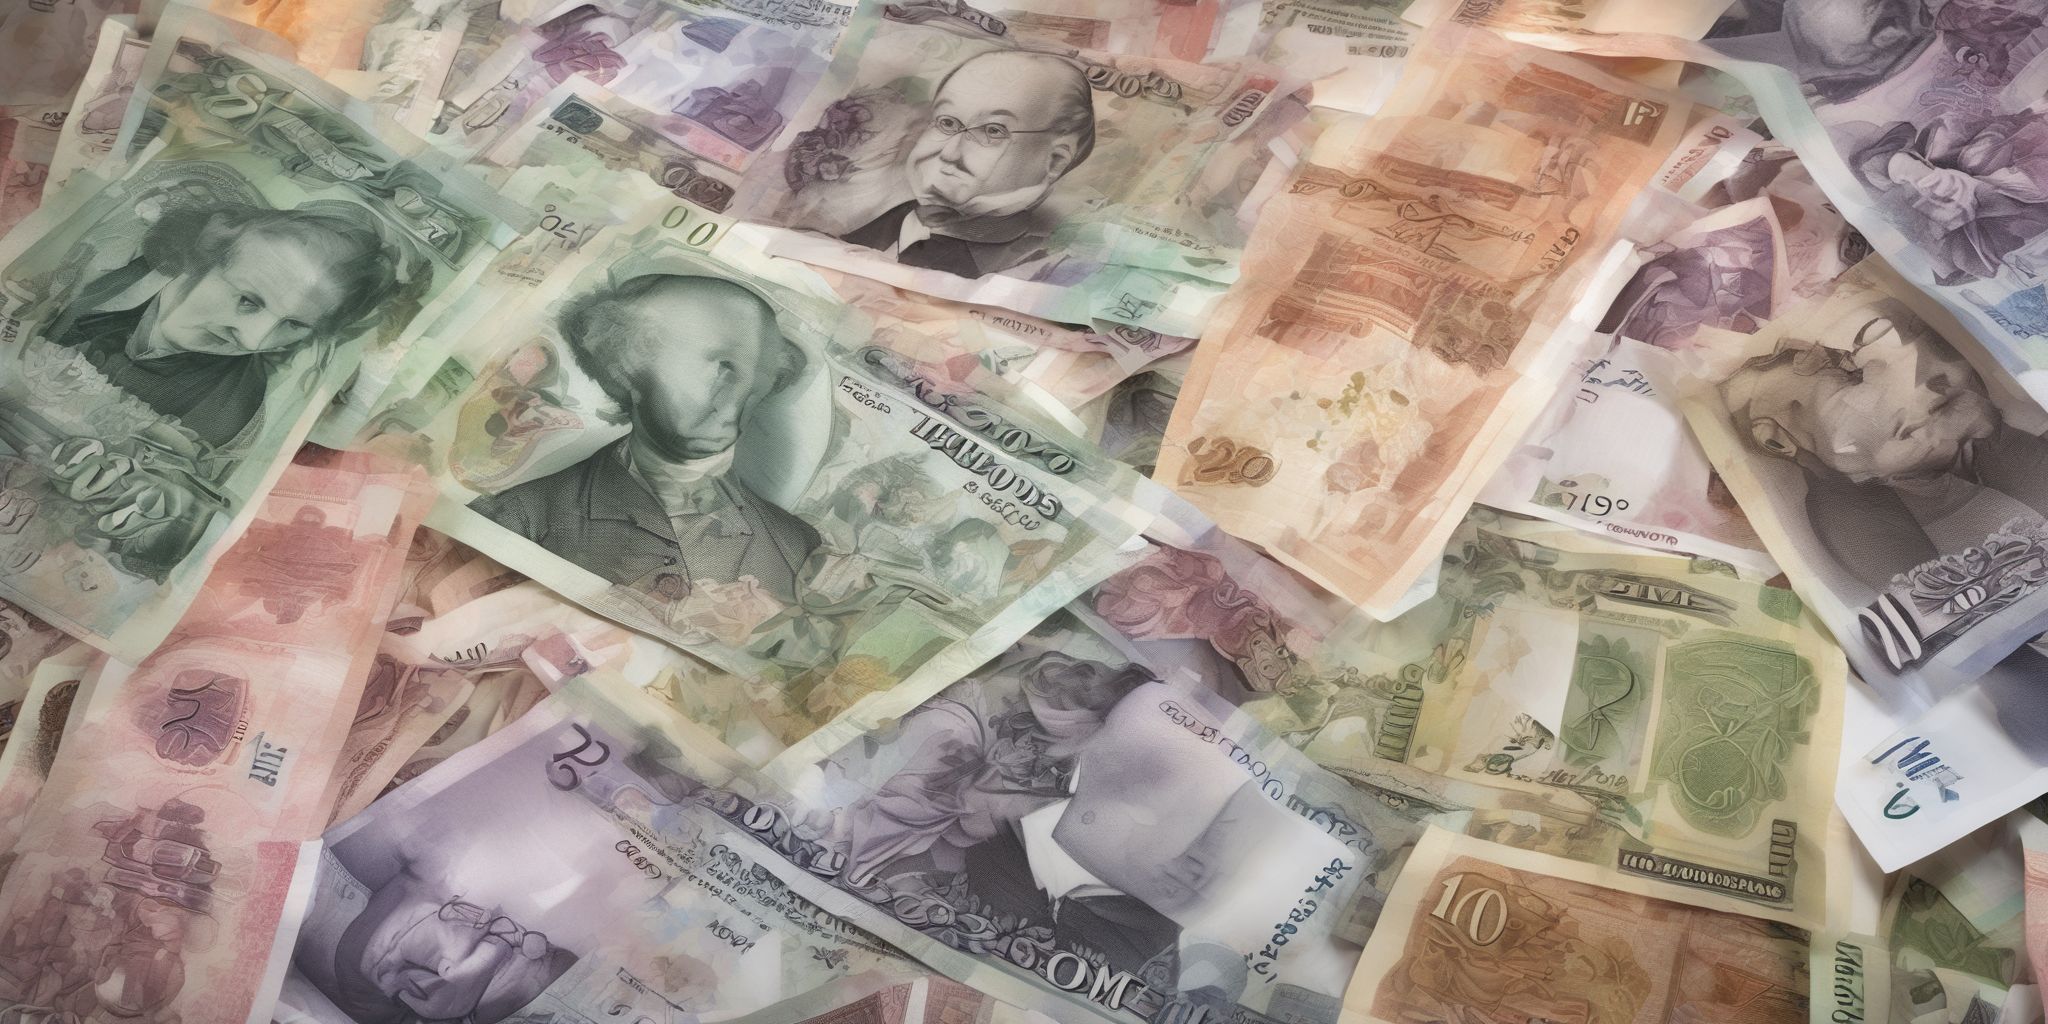 Banknotes  in realistic, photographic style